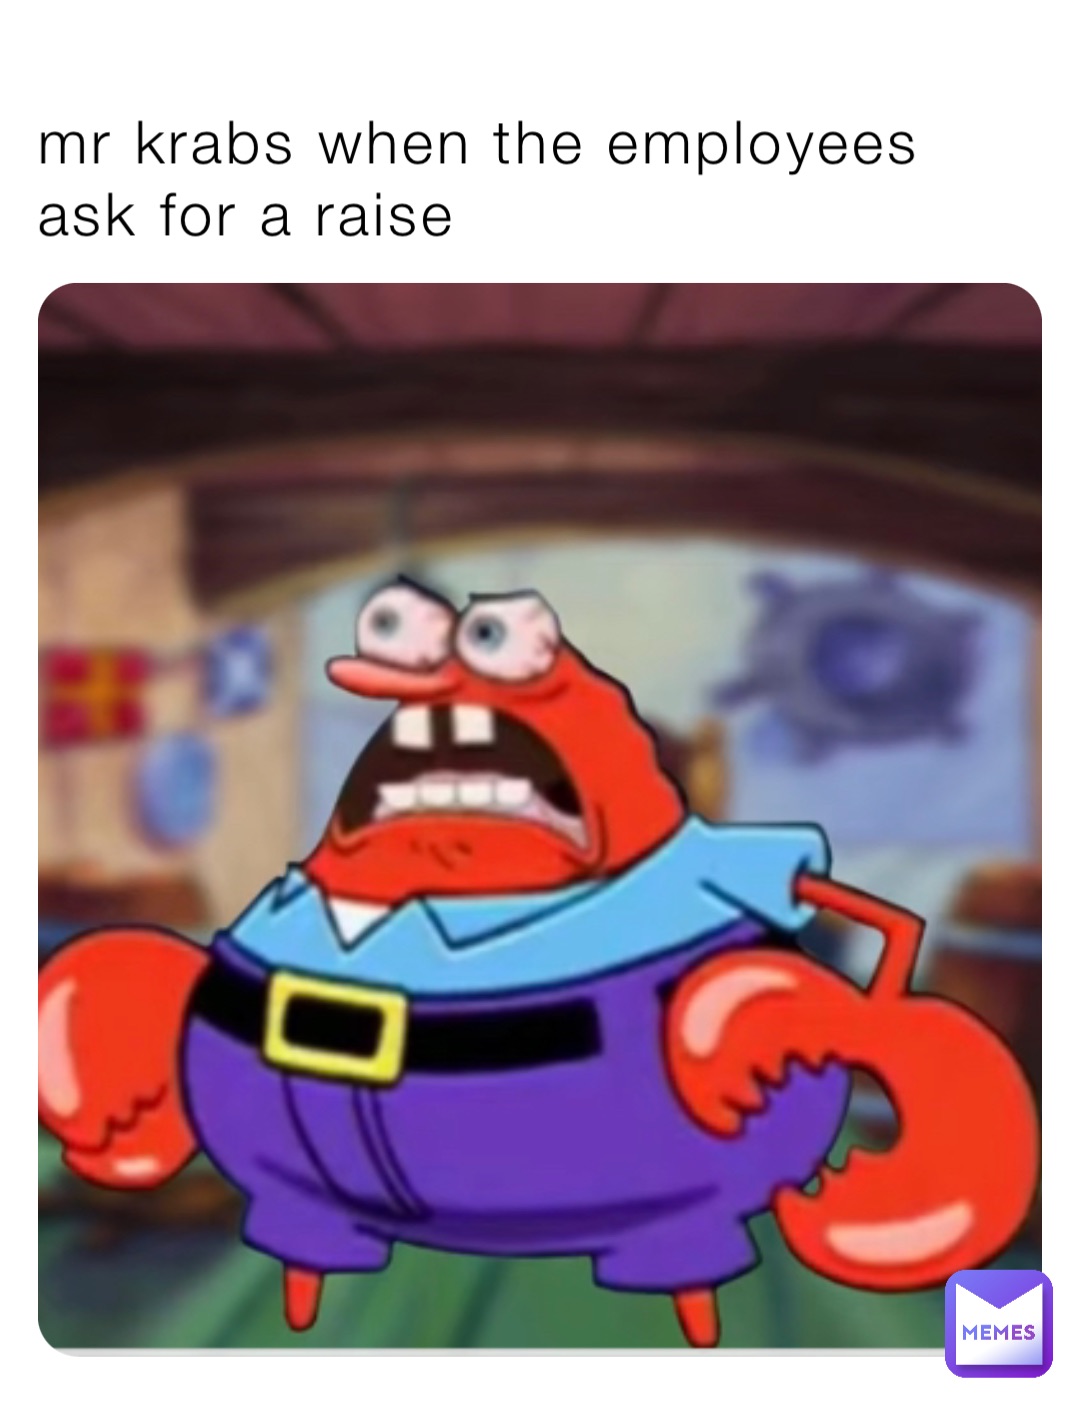 mr krabs when the employees ask for a raise | @JakeTheSniper | Memes